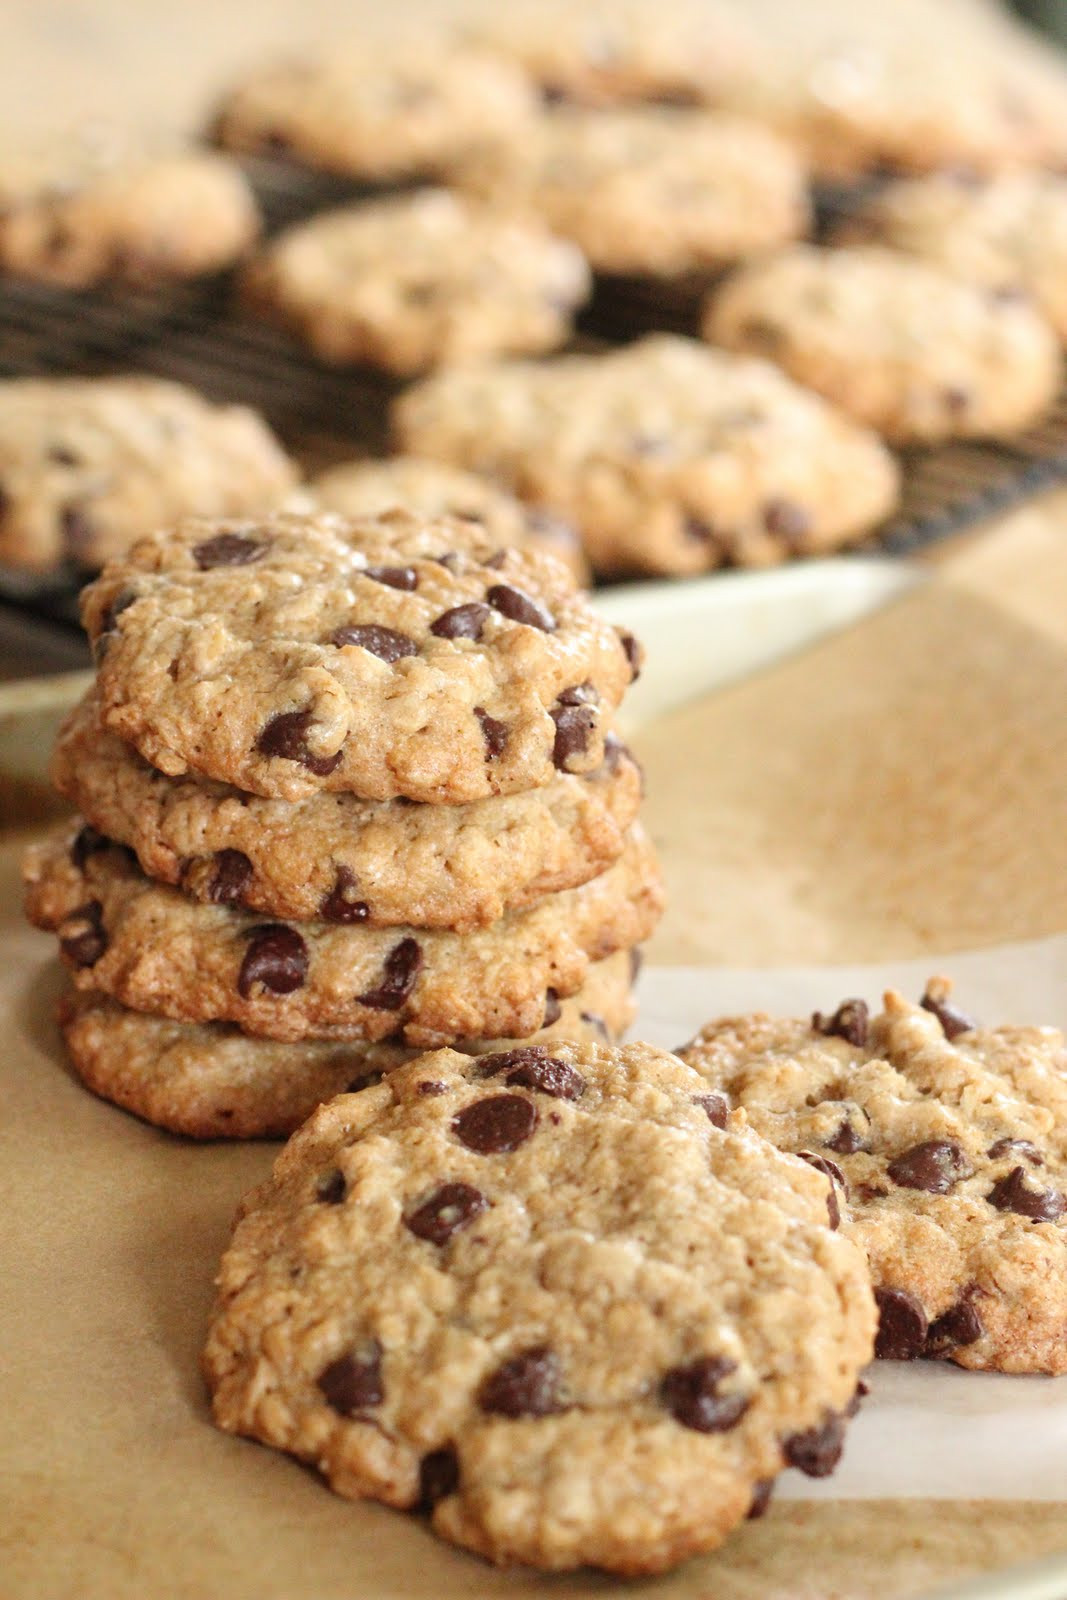 Choc Chip Oatmeal Cookies Healthy
 Ultimate healthier oatmeal and chocolate chip cookies